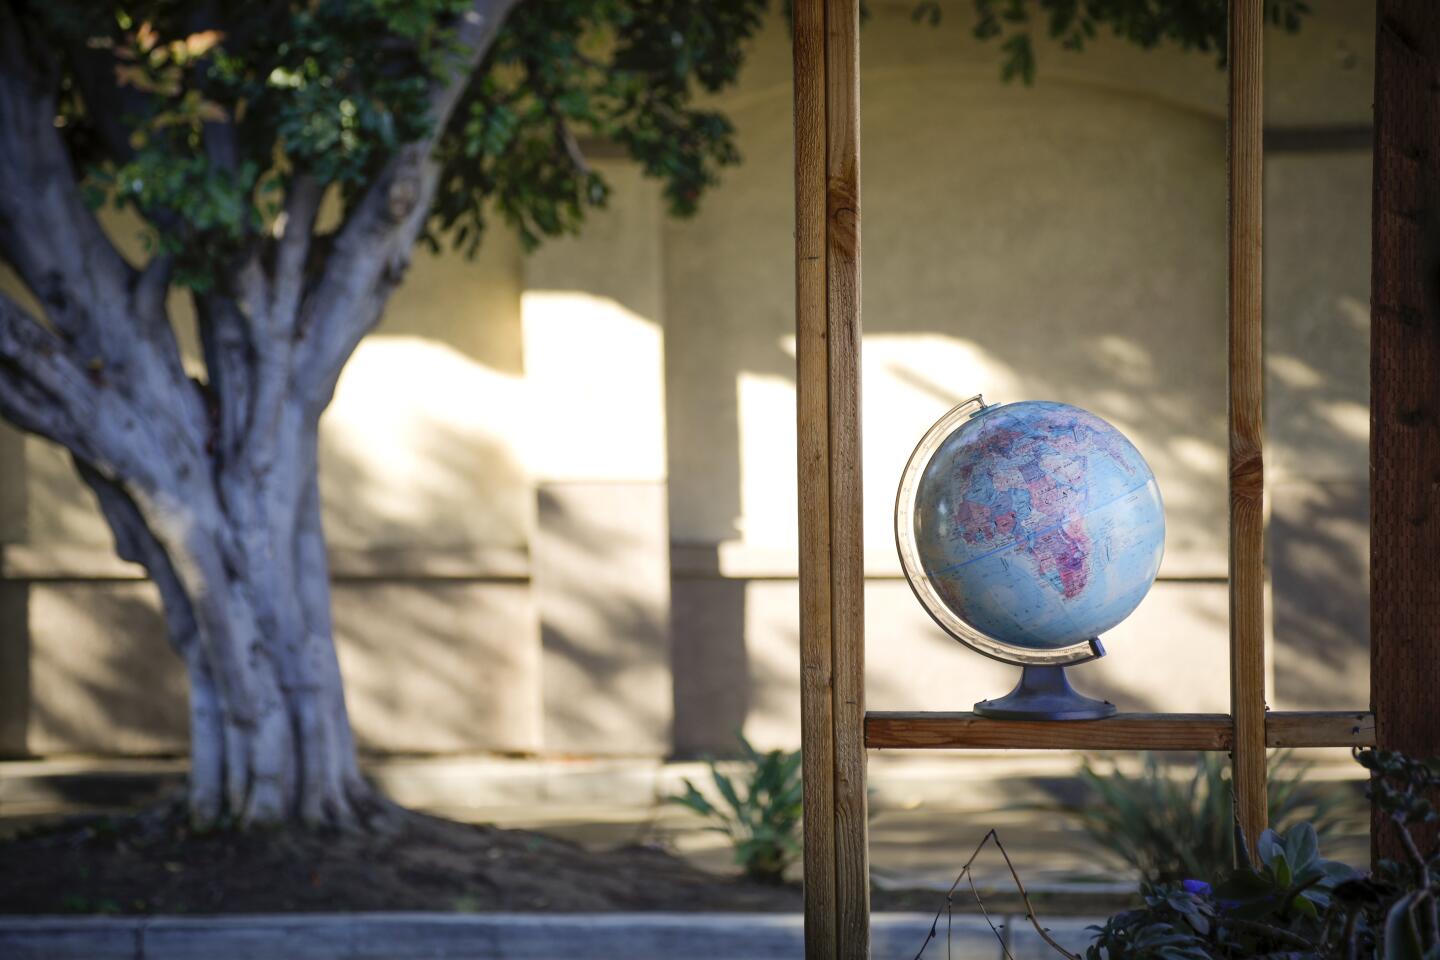 A desktop globe of the world is one of the many items at Lhooq Books, a funky vintage bookstore in Carlsbad Village. Sean Christopher, the owner recently received a 60-day eviction notice for both the shop and the adjoining house where he has raised his son, alone. He's hoping to achieve a stay of eviction on the property long enough to sell off his book inventory and find a new space without going bankrupt and ending up homeless with his son.